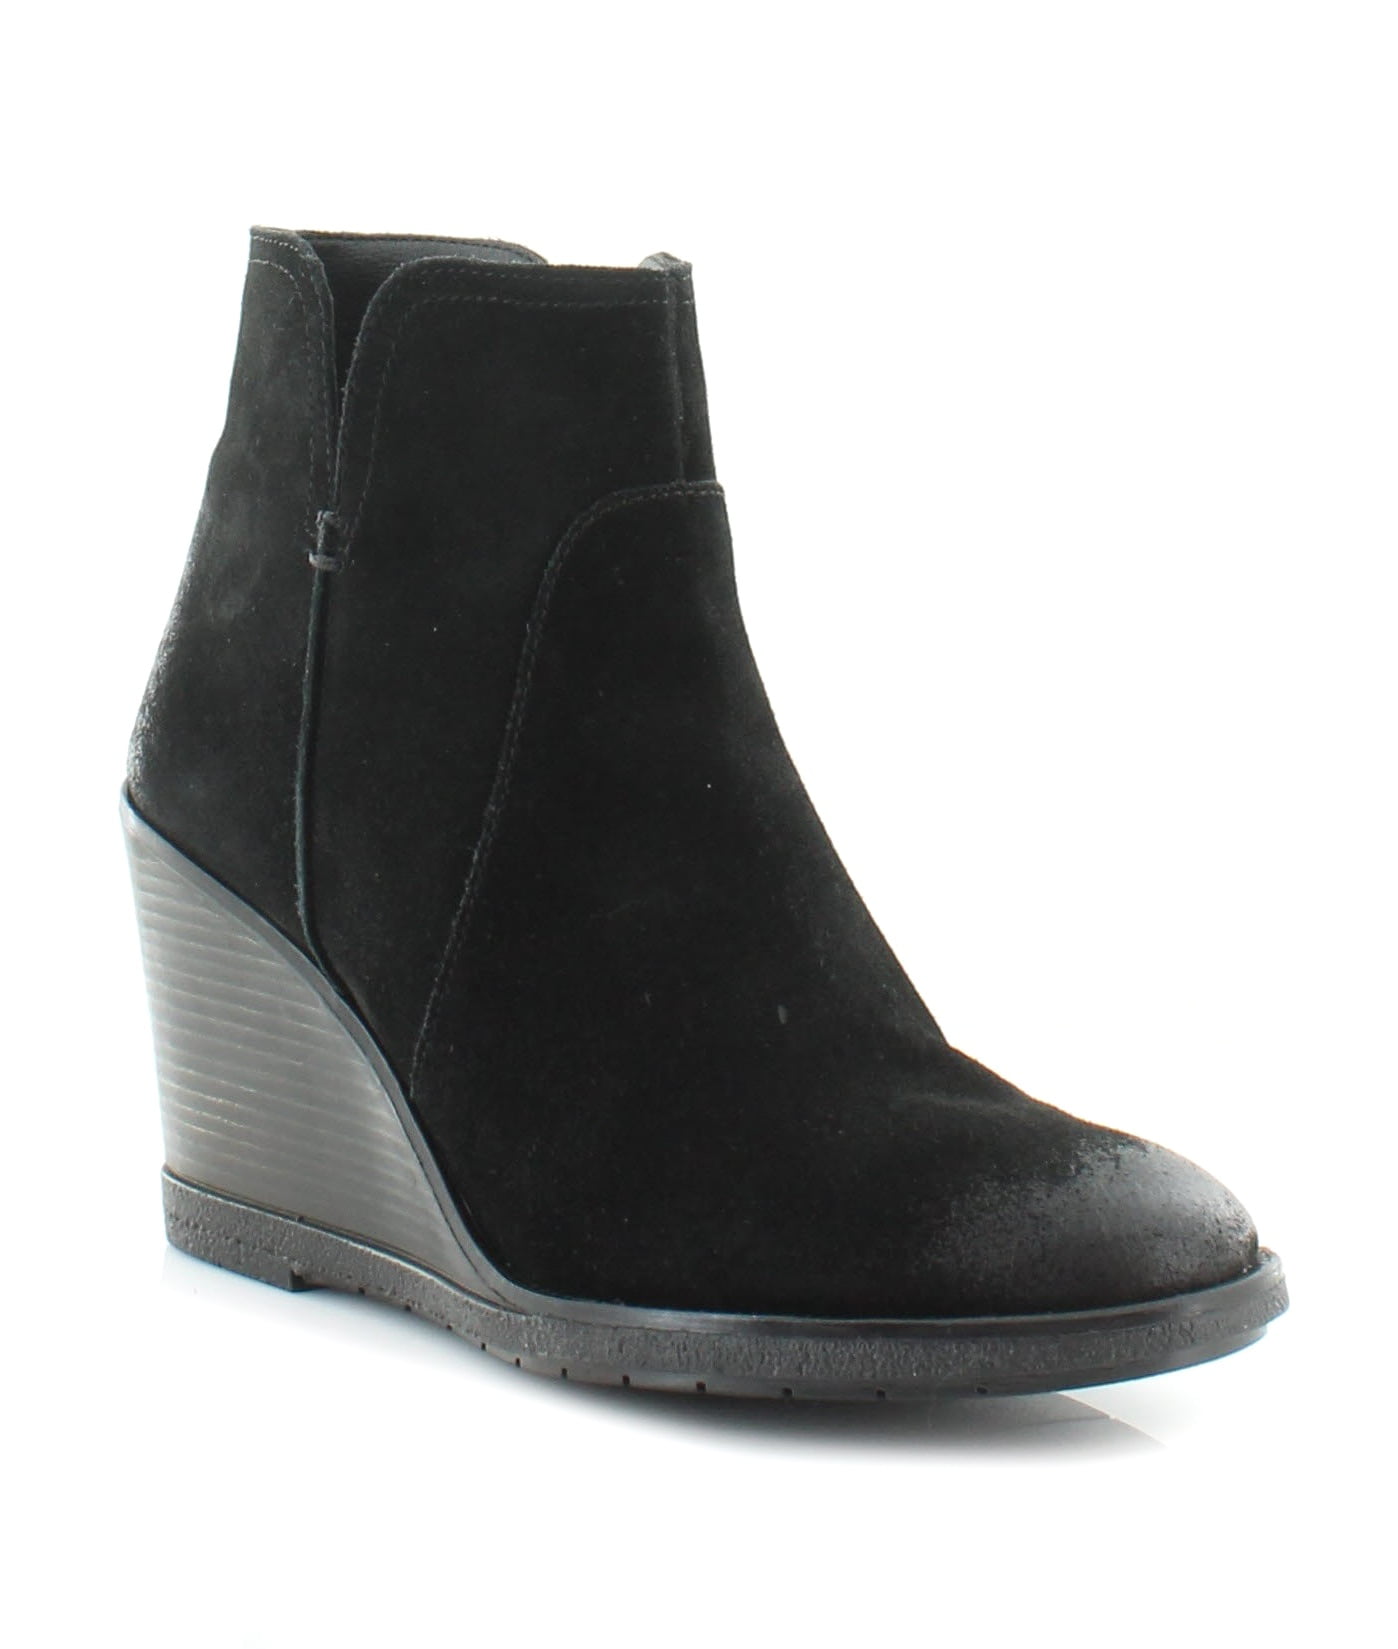 Kenneth Cole Reaction - Kenneth Cole Reaction Dot Ation Women's Boots ...